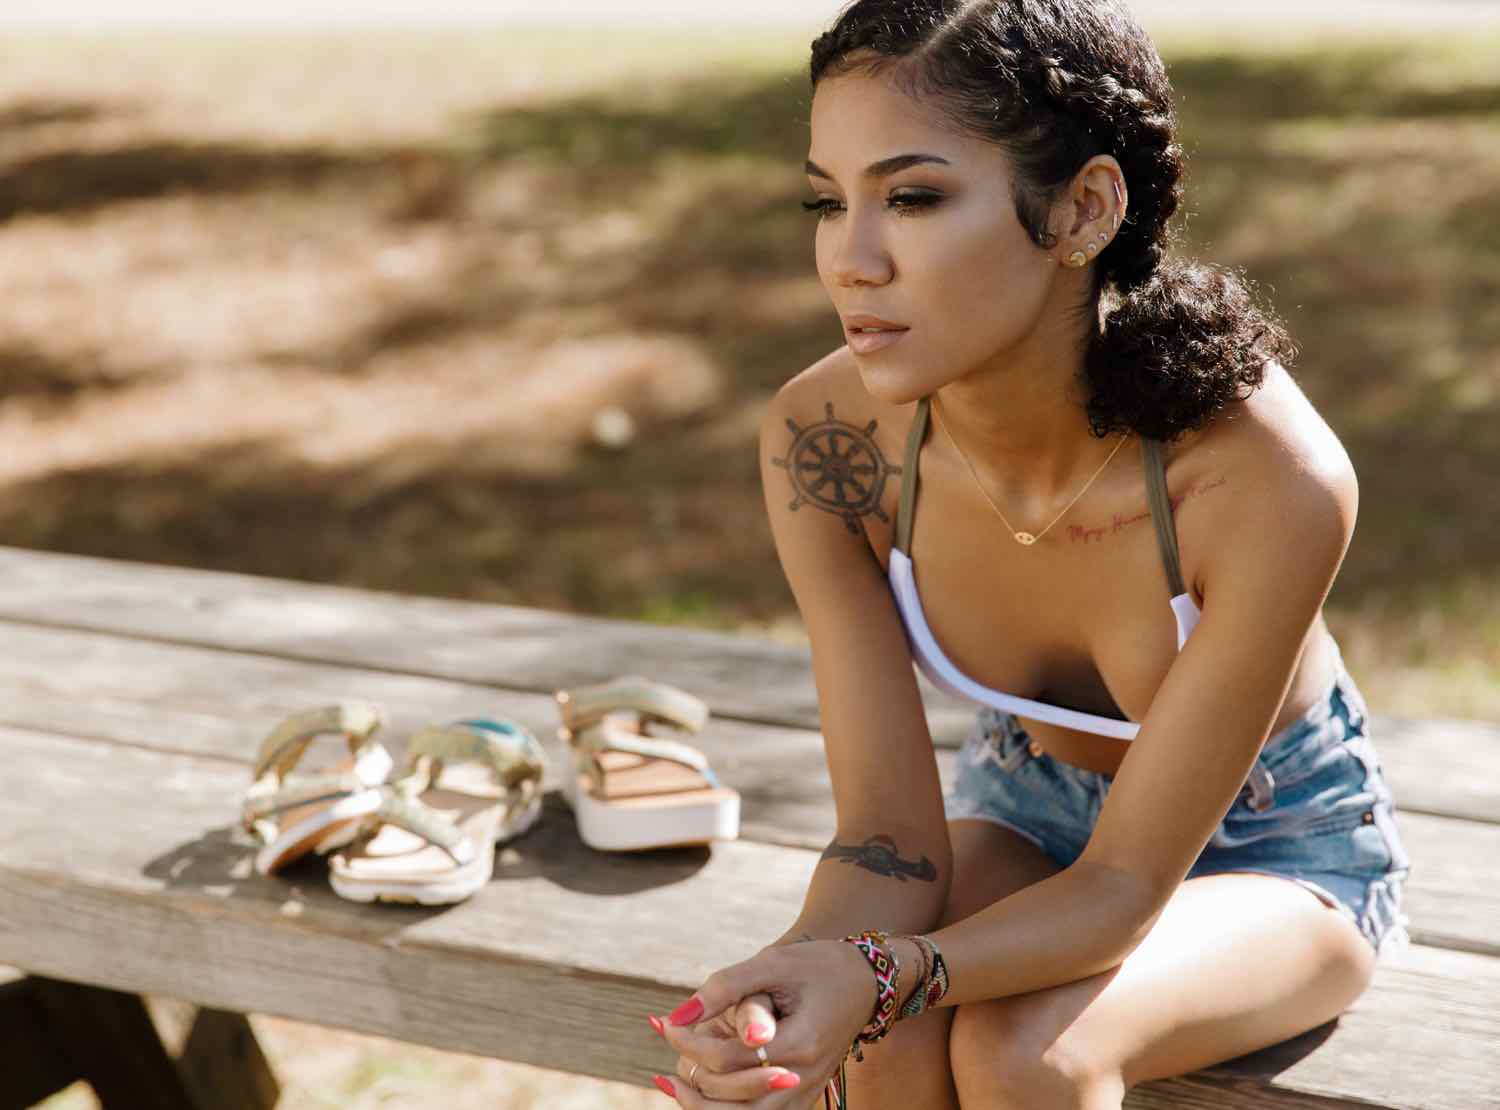 An Emotionally Chaotic Beauty: Jhene Aiko takes us on a “Trip.